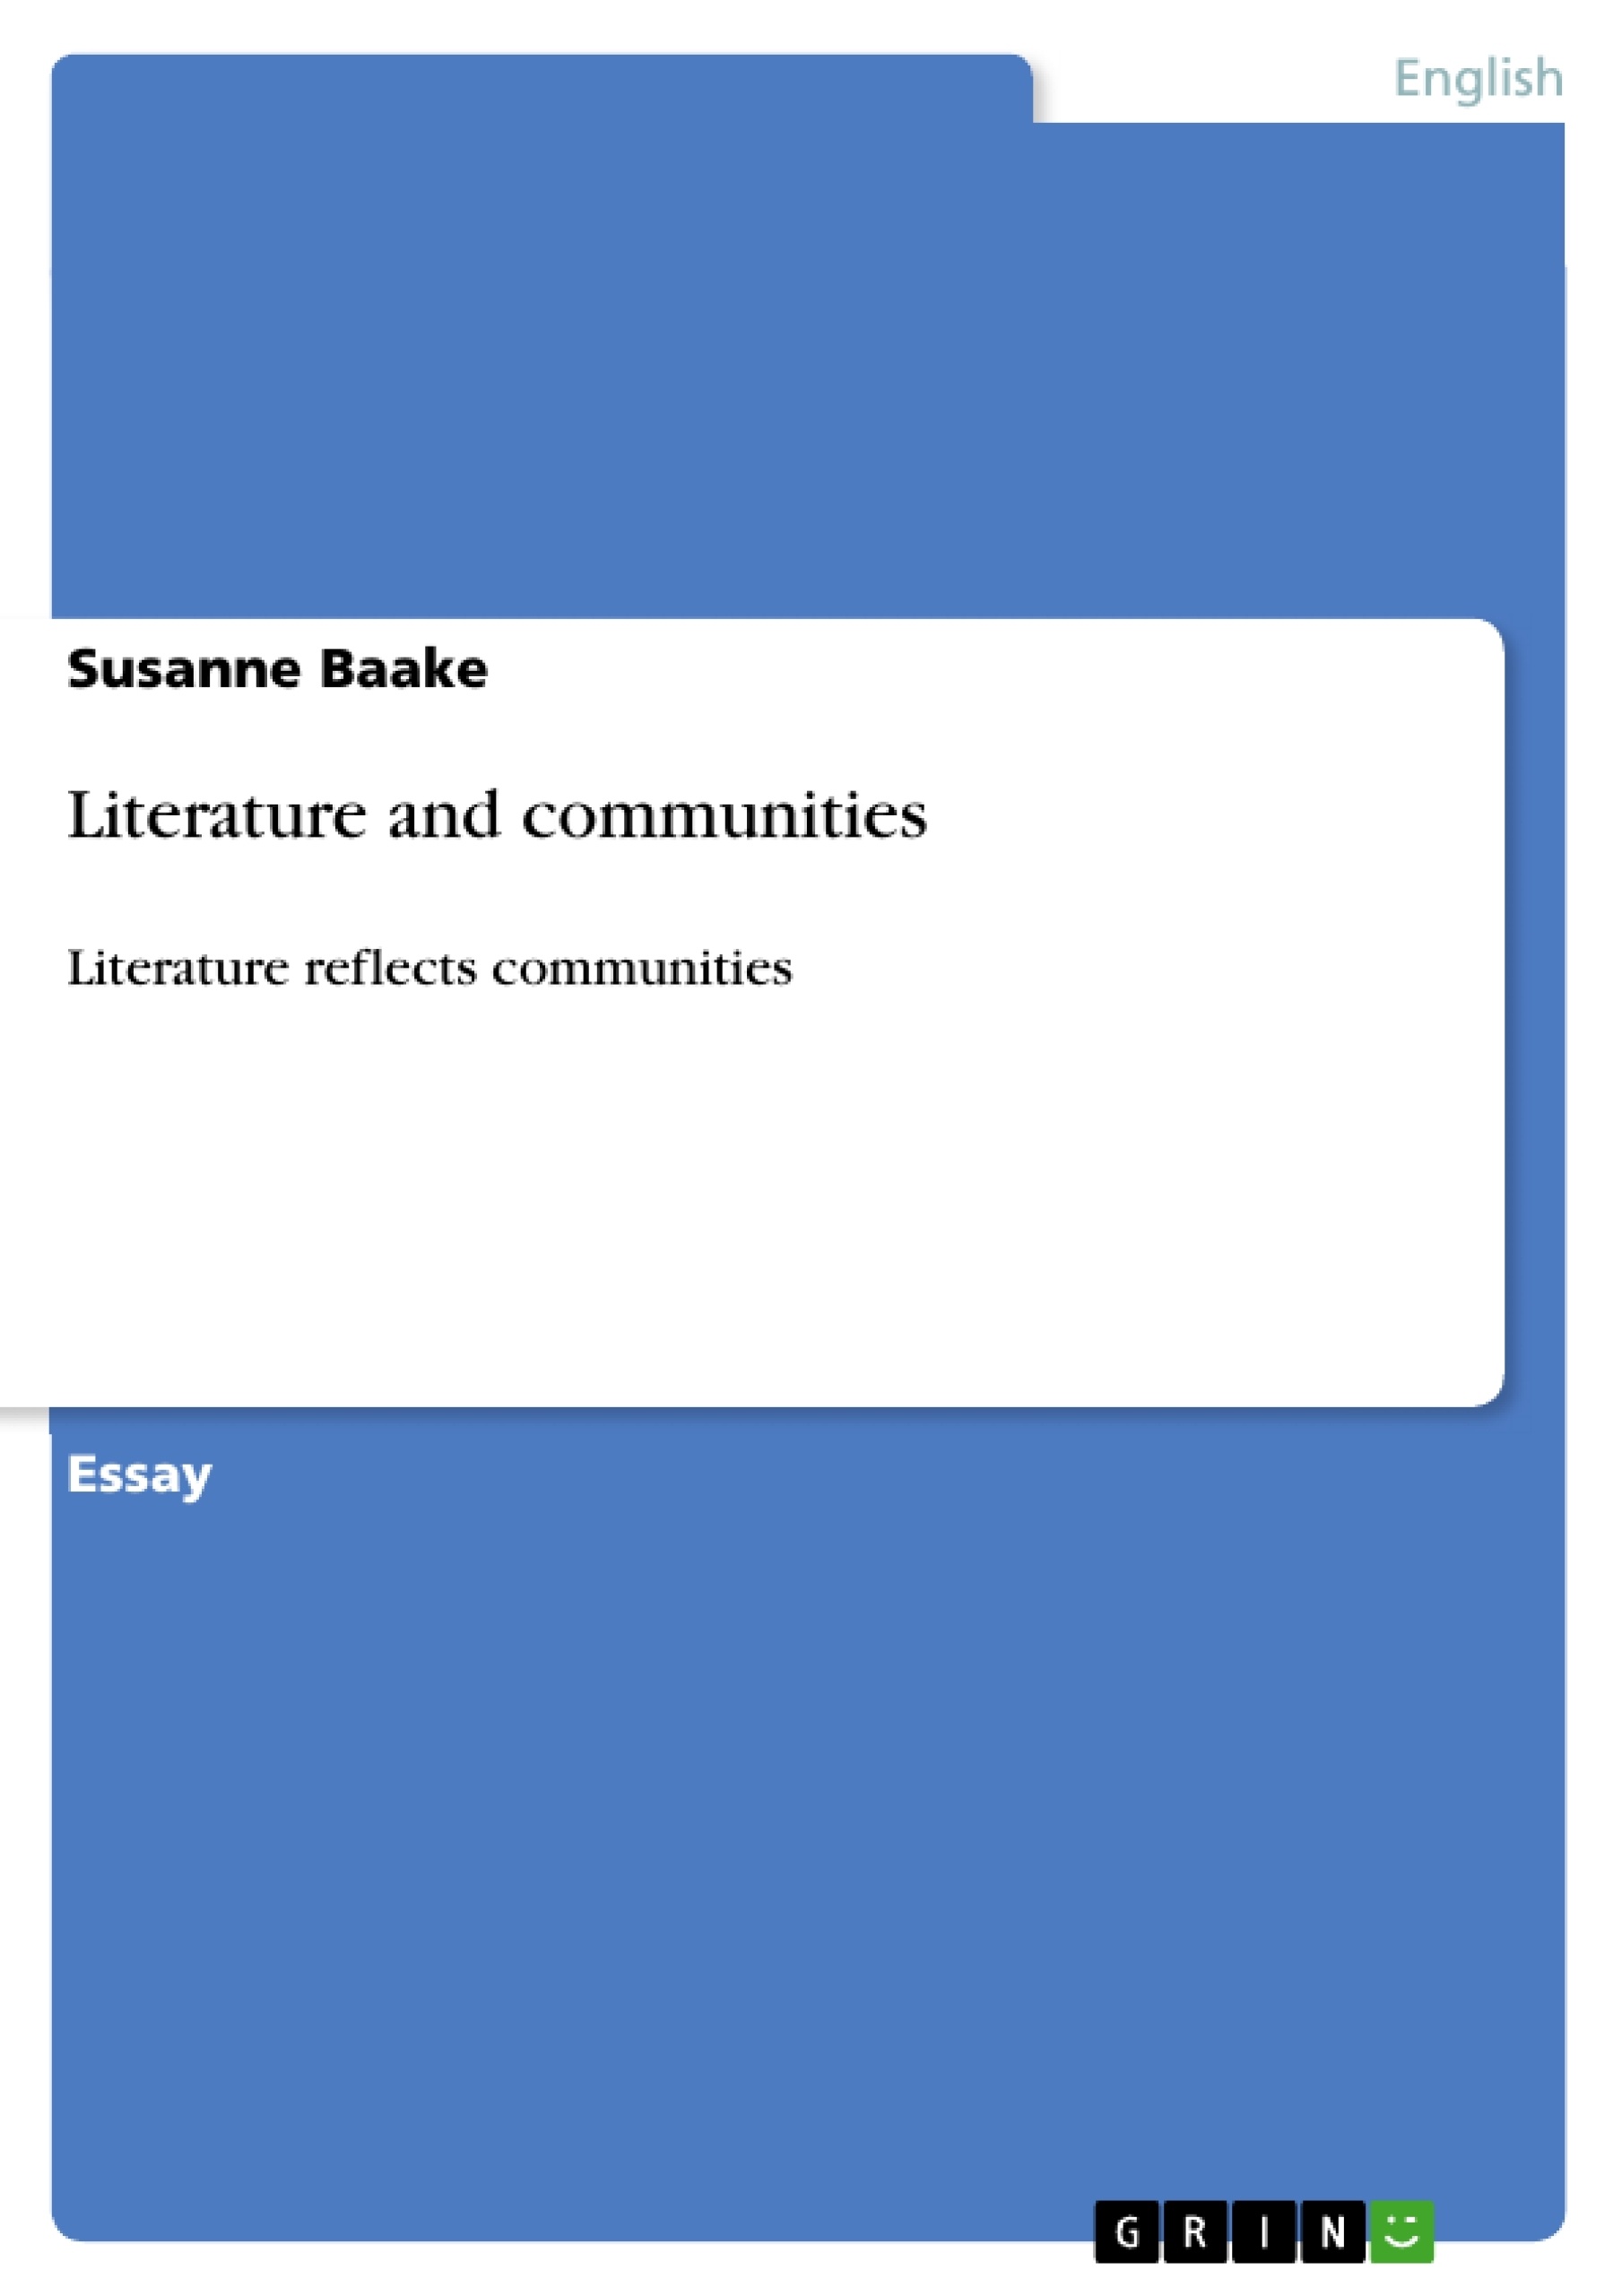 Title: Literature and communities